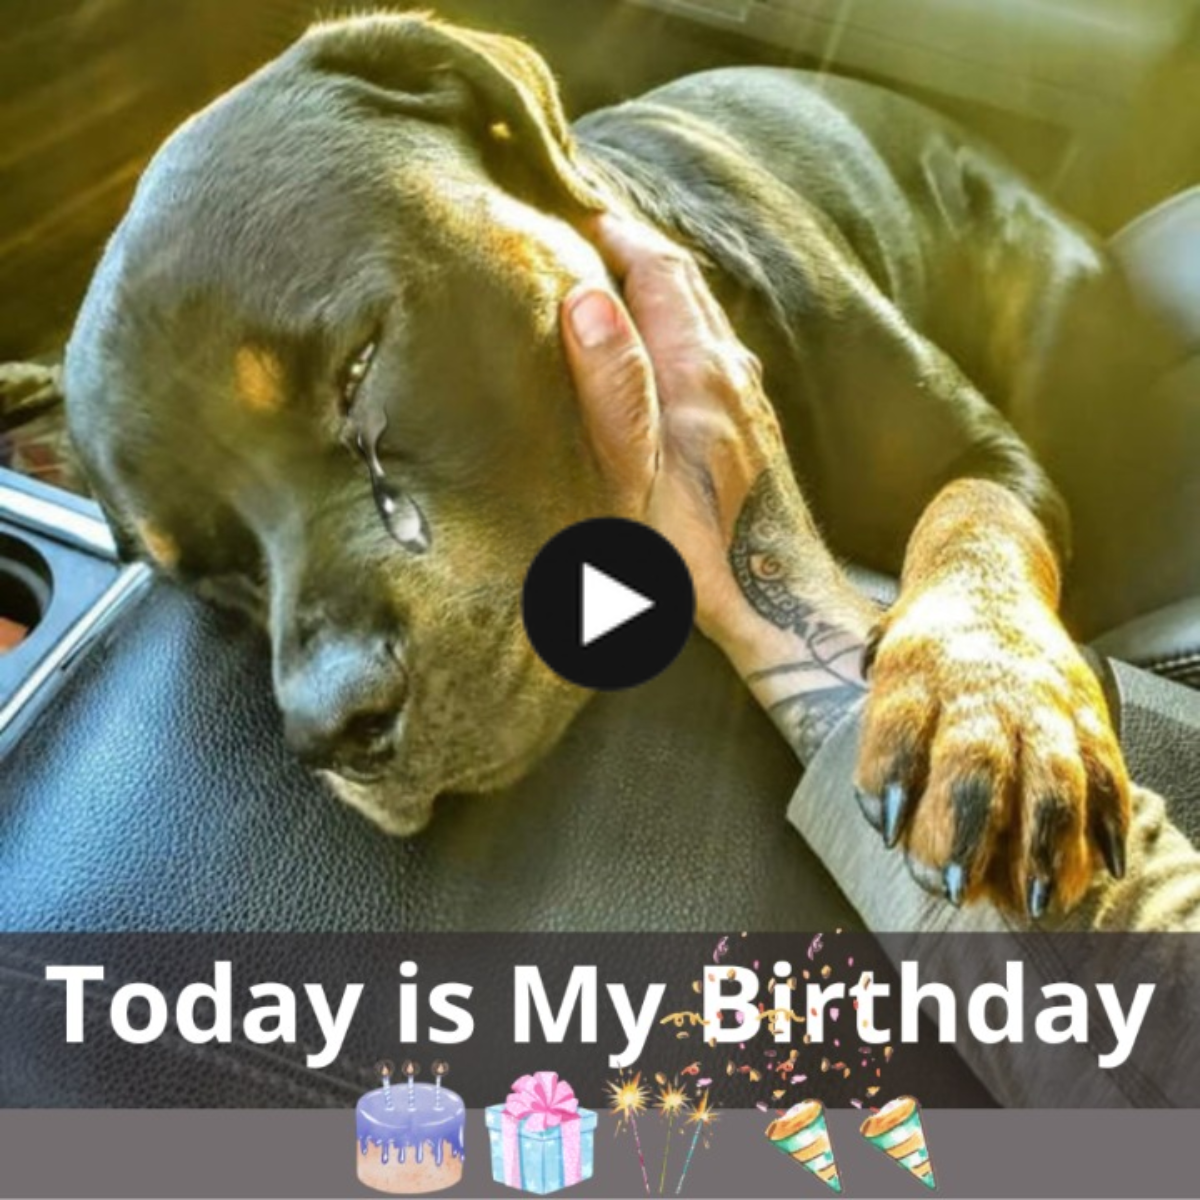 Birthday story: Celebrate the joy of a lonely puppy, a lonely birthday with no one wishing him